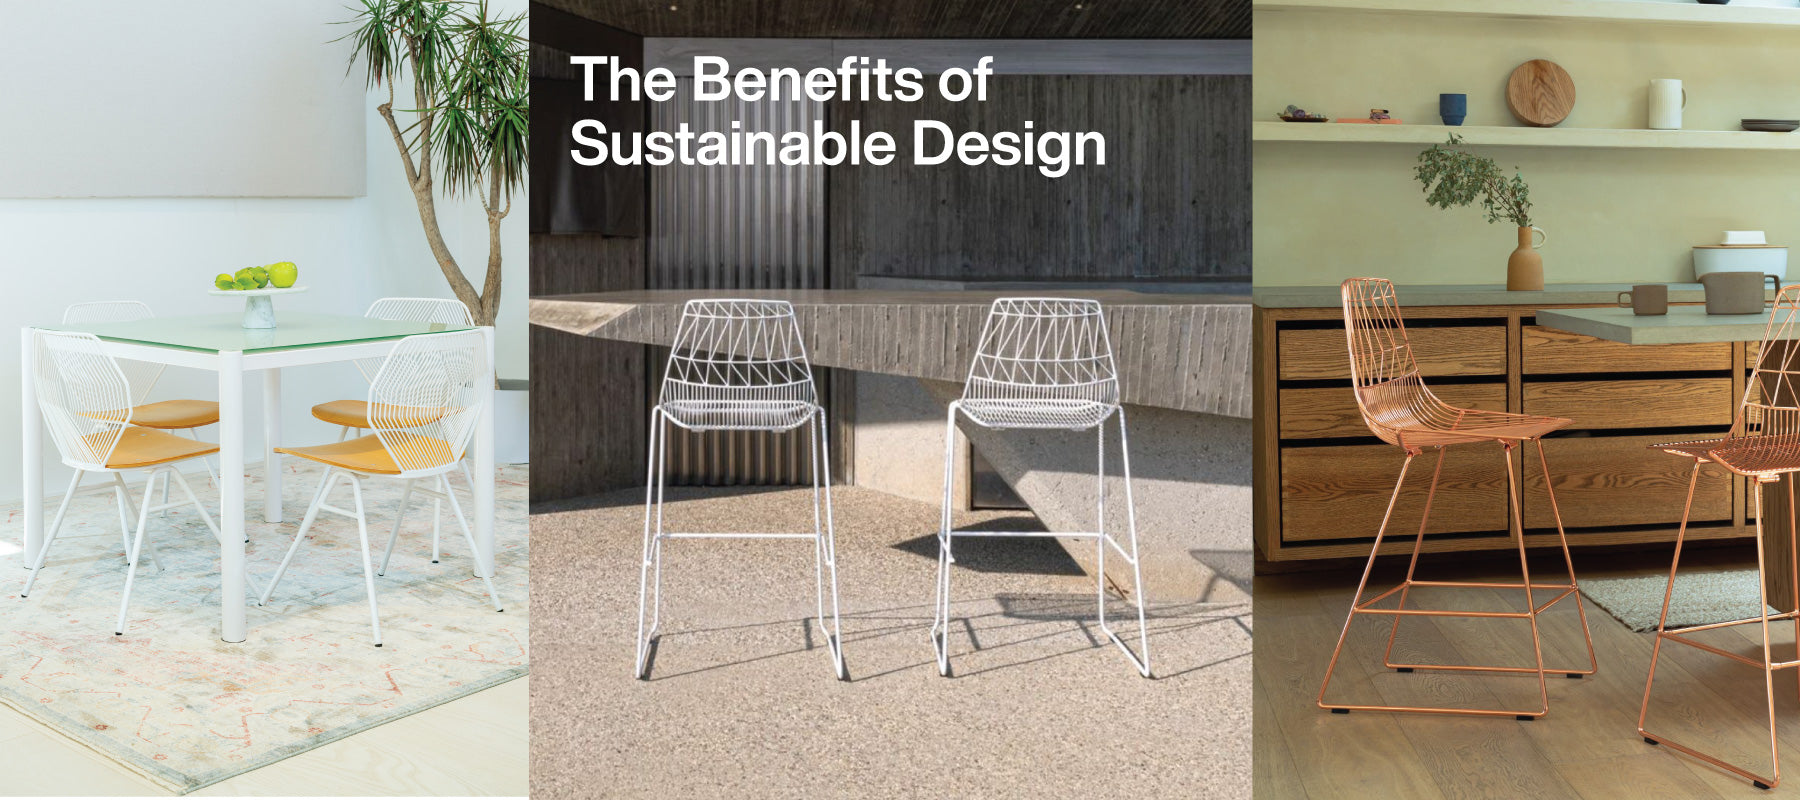 Durable Furniture and The Benefits of Sustainable Design